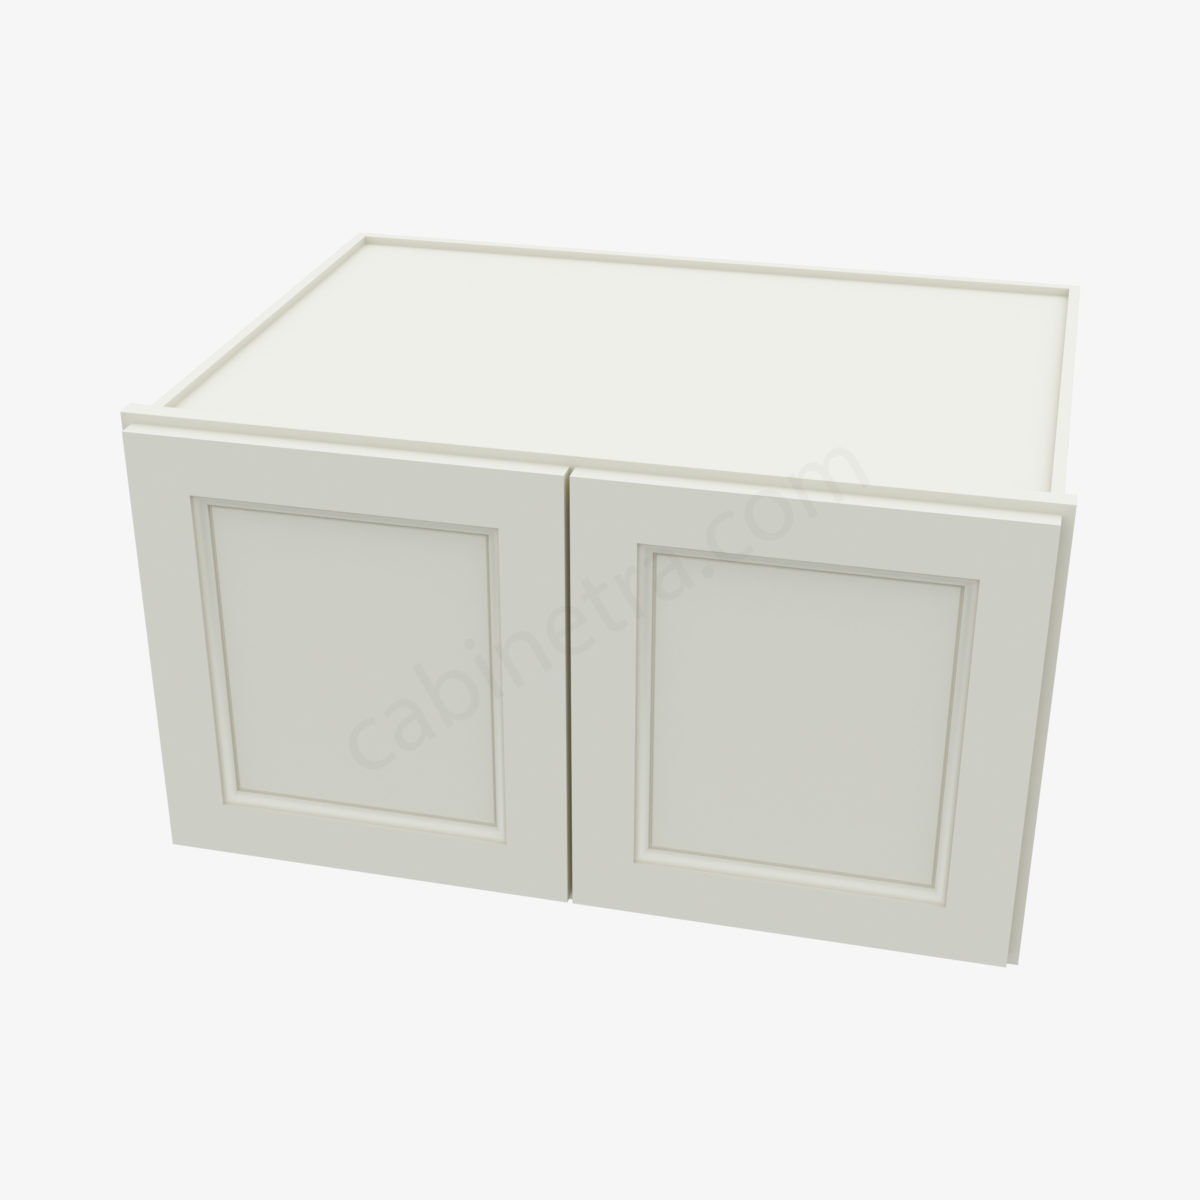 TQ W331824B 3 Forevermark Townplace Crema Cabinetra scaled